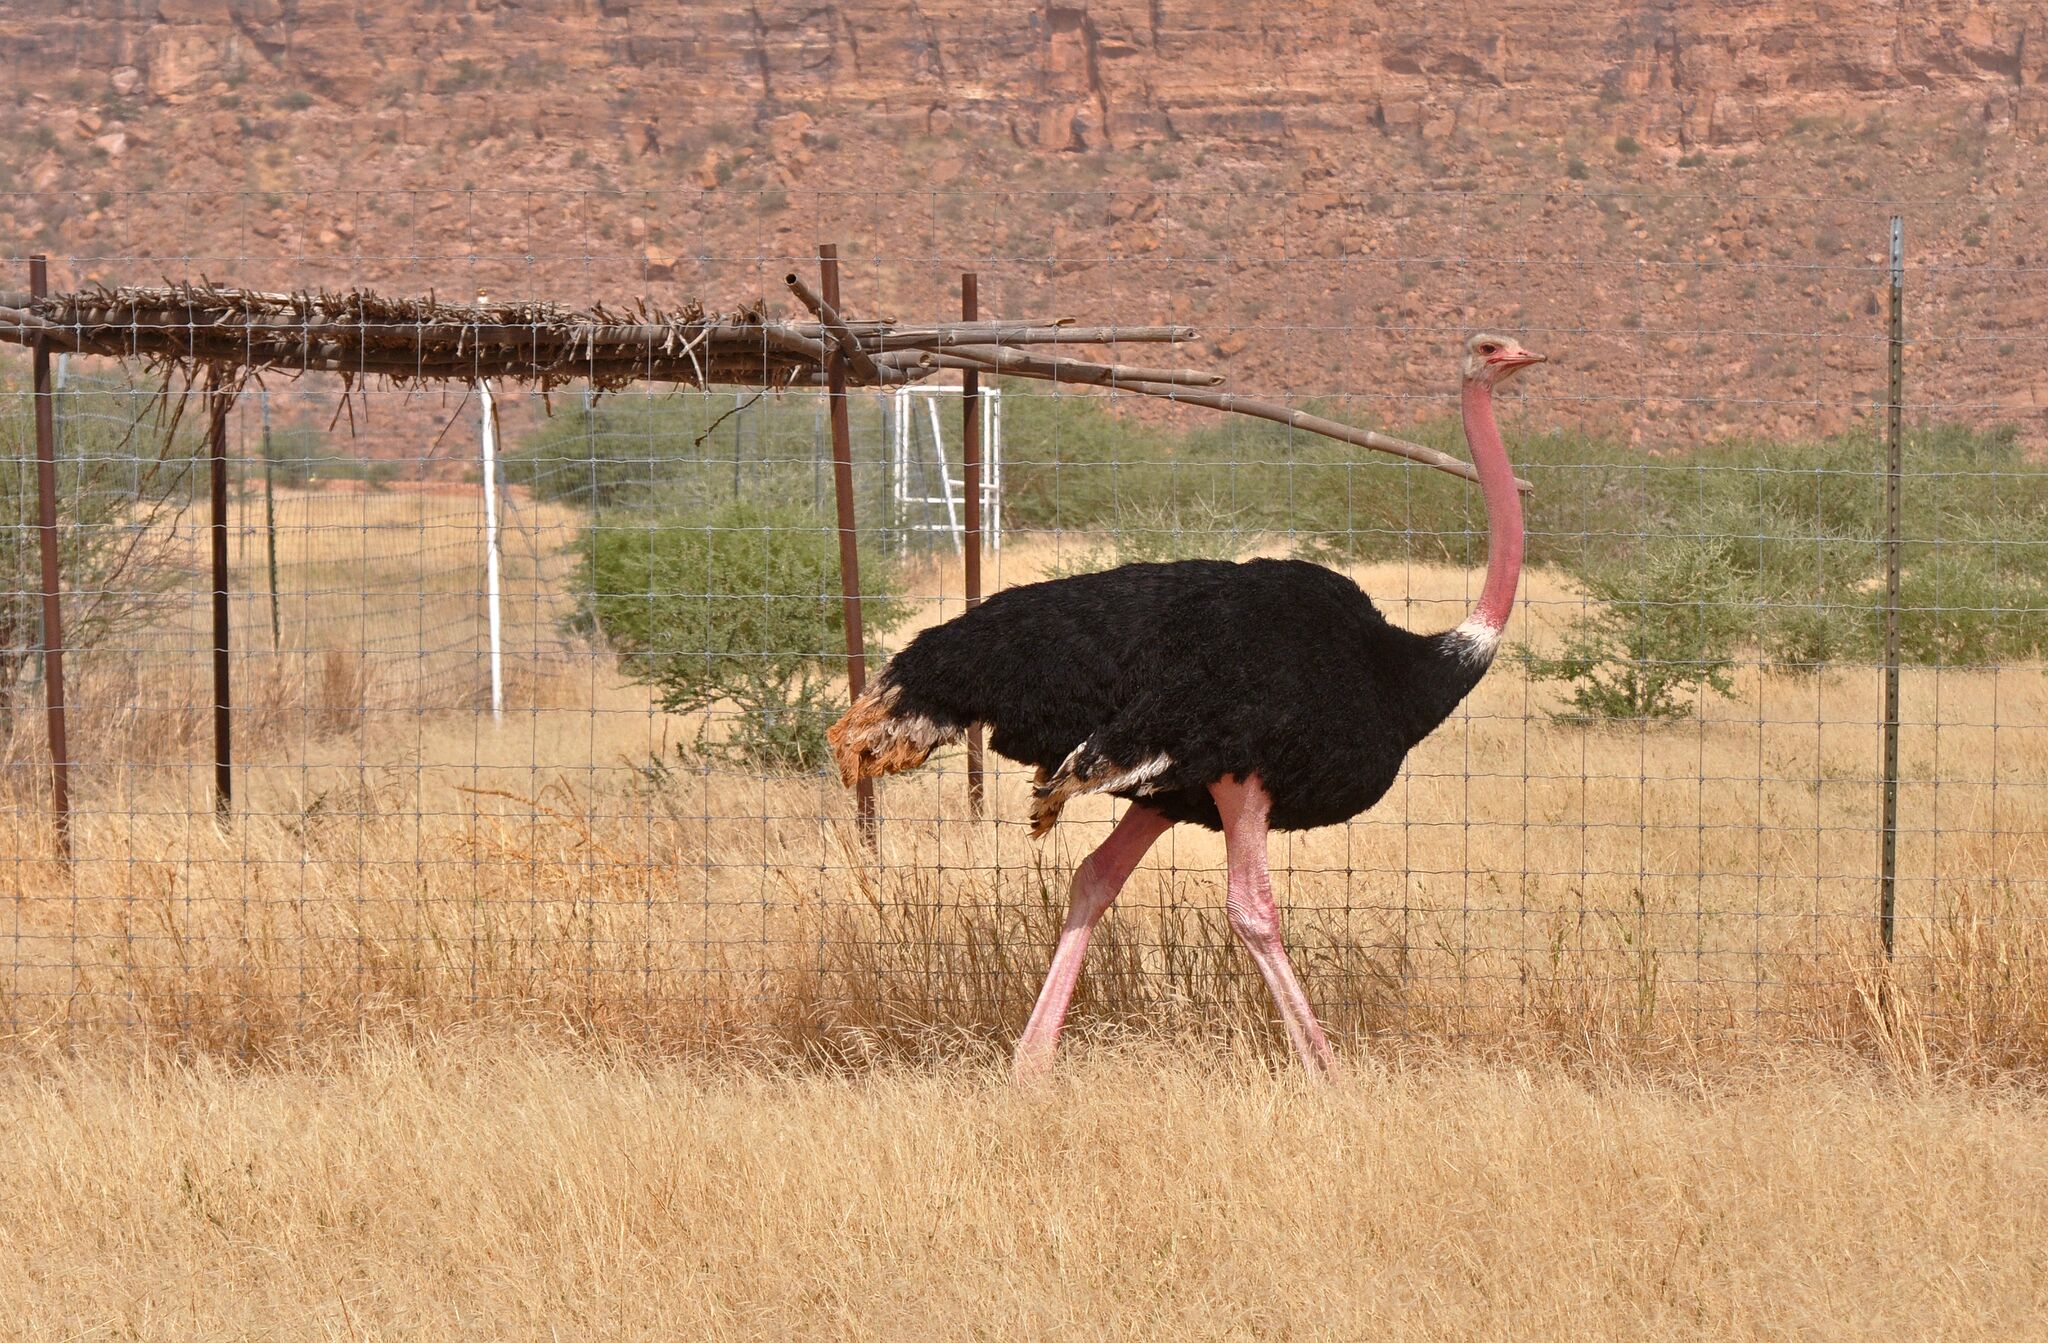 NatureForm partners with Sahara Conservation Fund to save North African ostriches